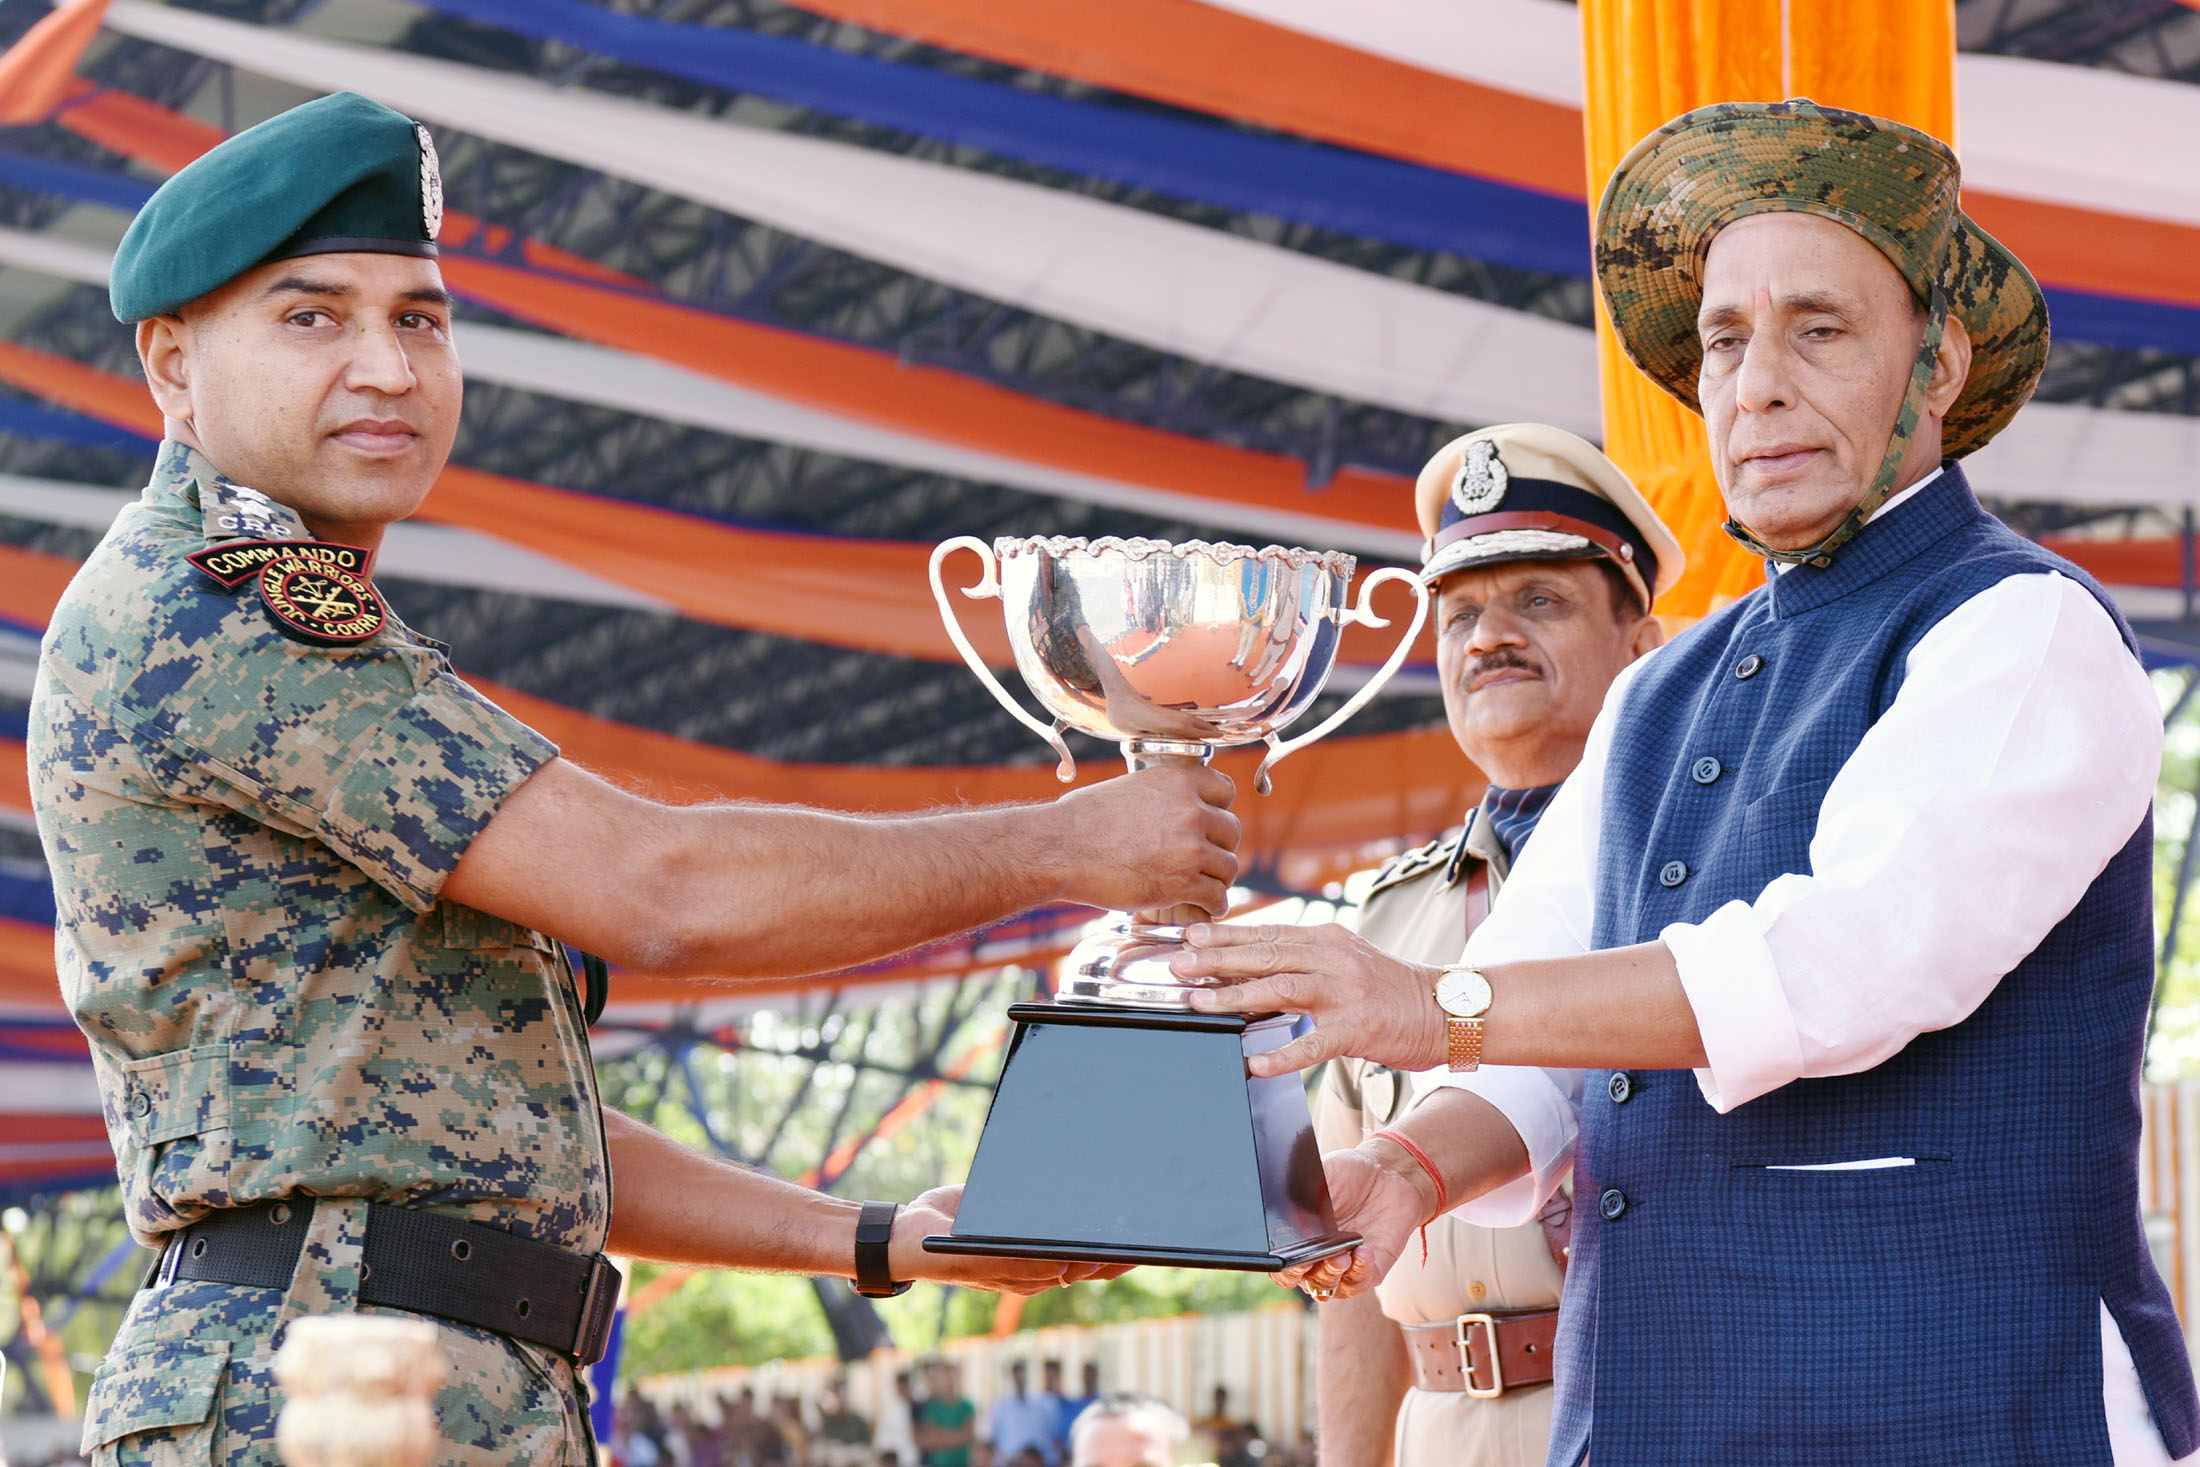 The Union Home Minister, Shri Rajnath Singh presenting trophies on the occasion of CRPFs 79th Raising Day Parade, in Gurugram, Haryana in March 24, 2018.